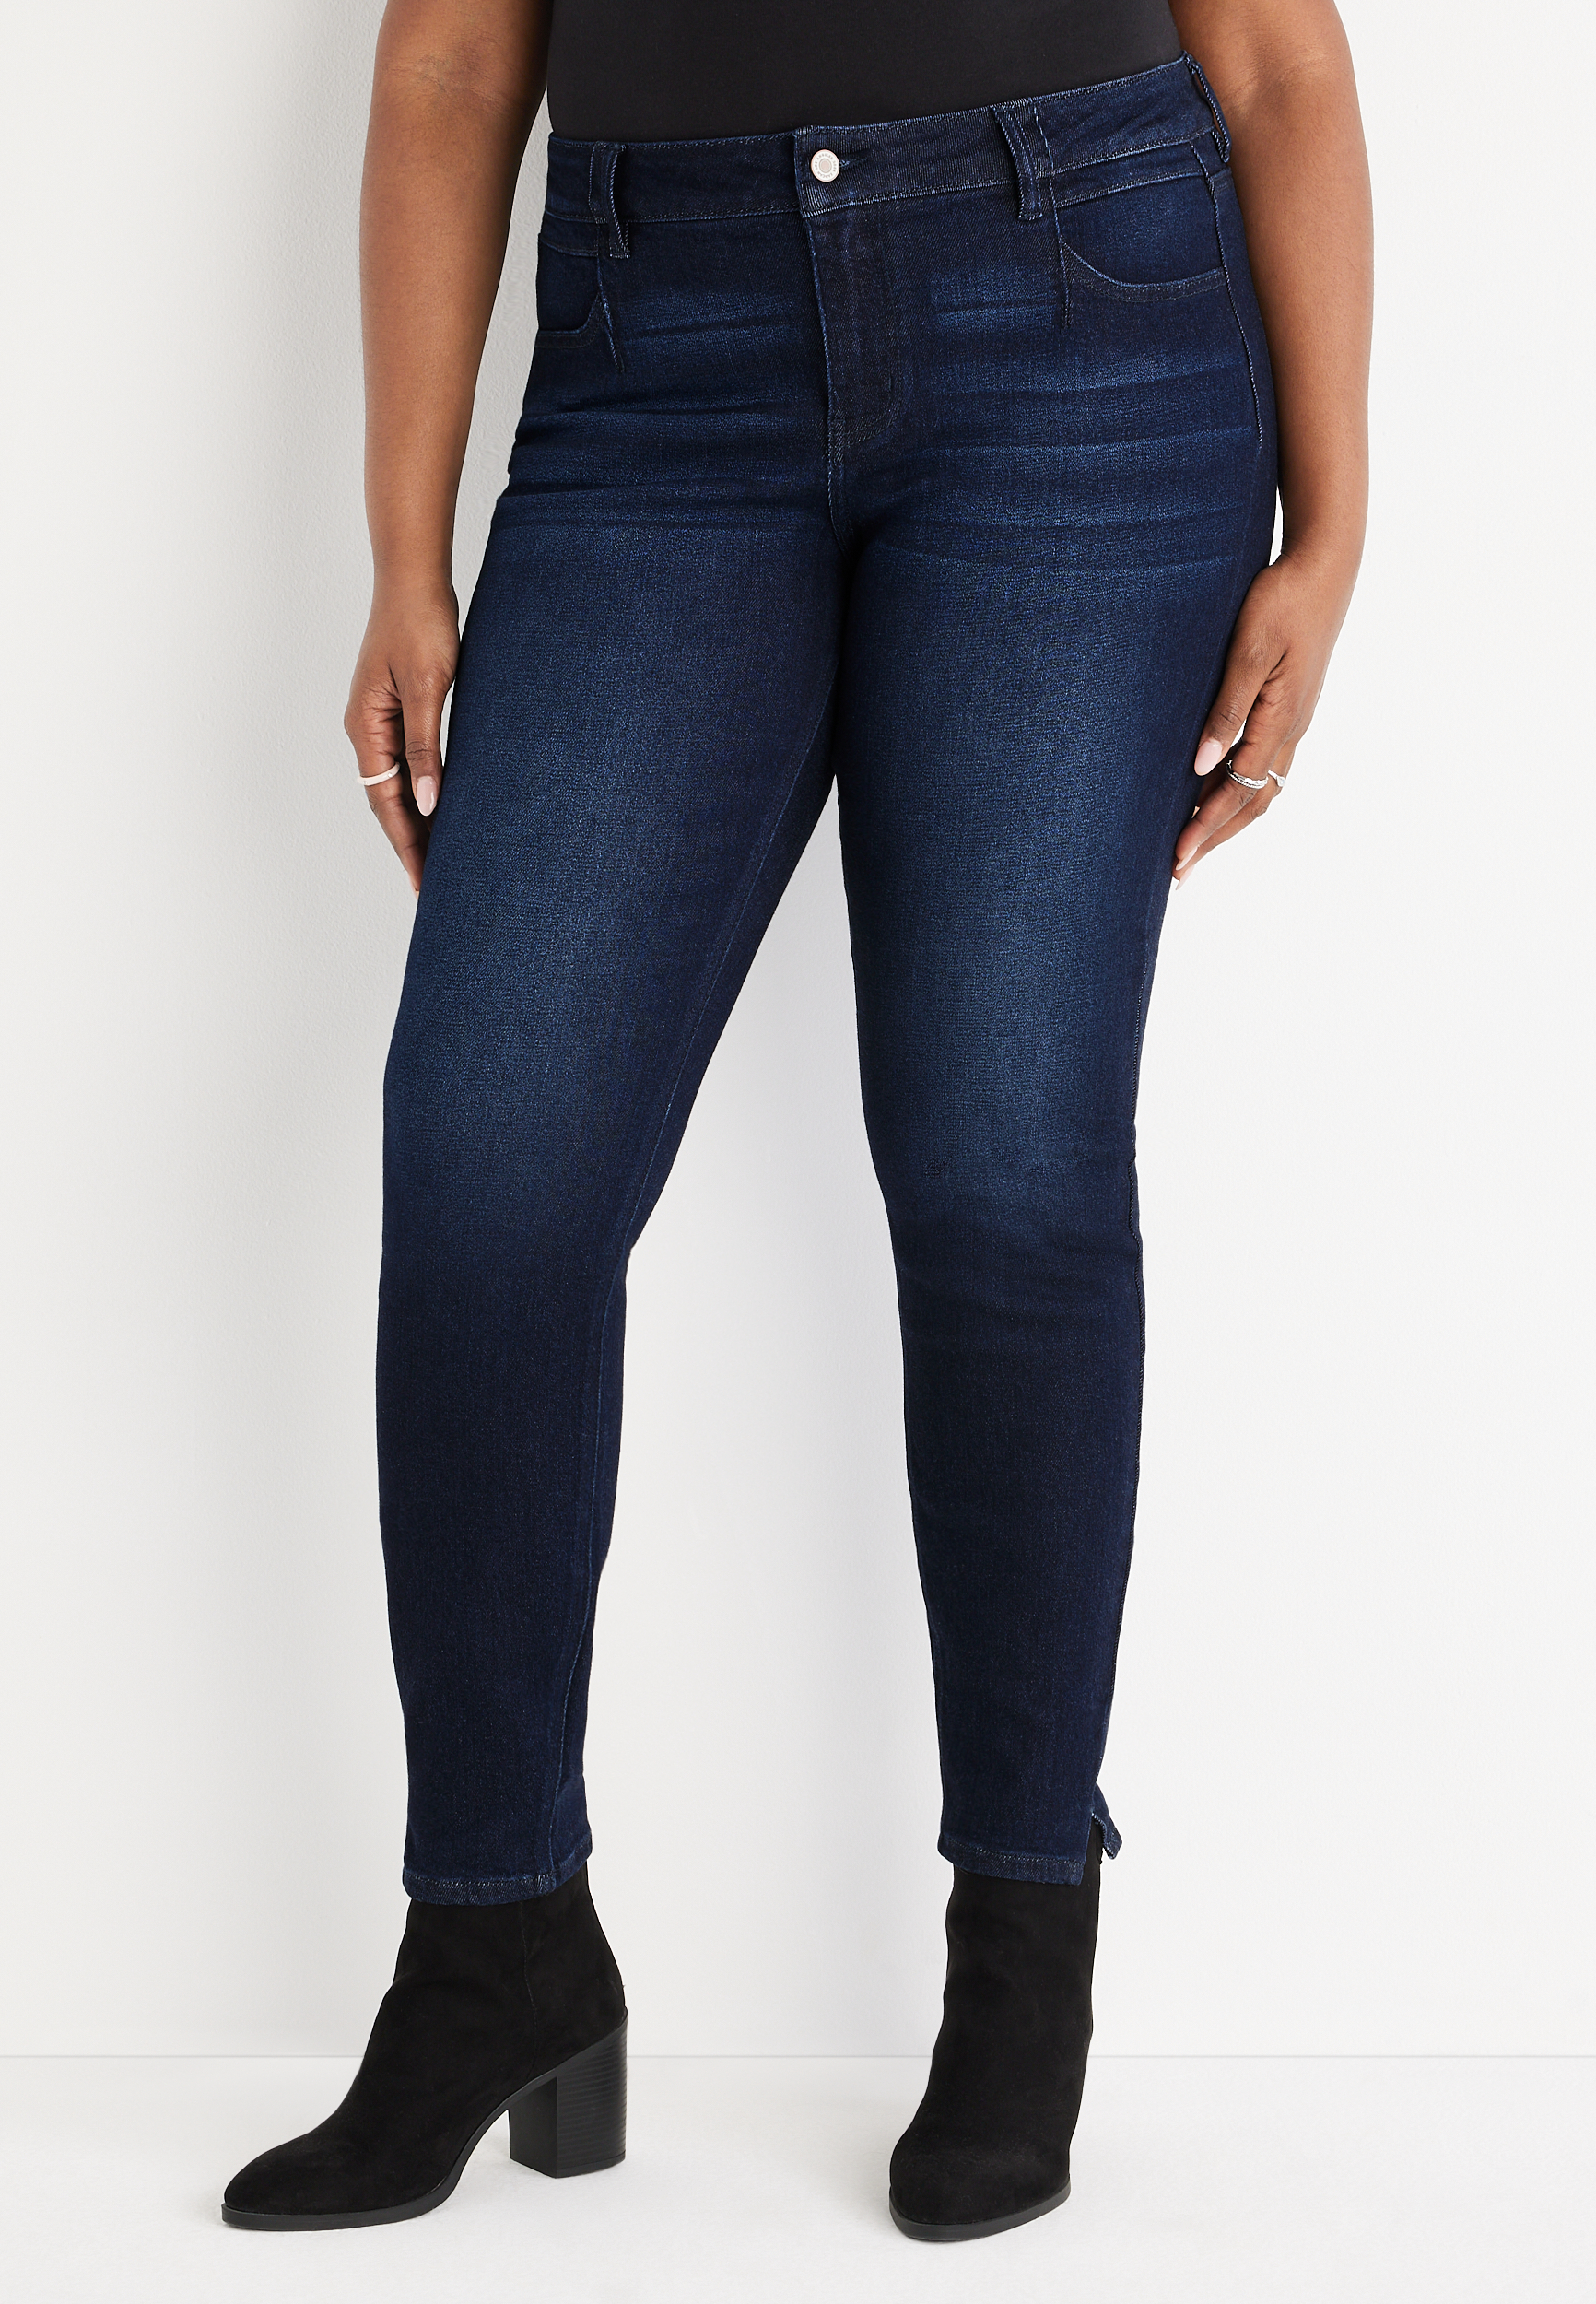 Plus Size KanCan™ Skinny Mid Rise Jean | maurices